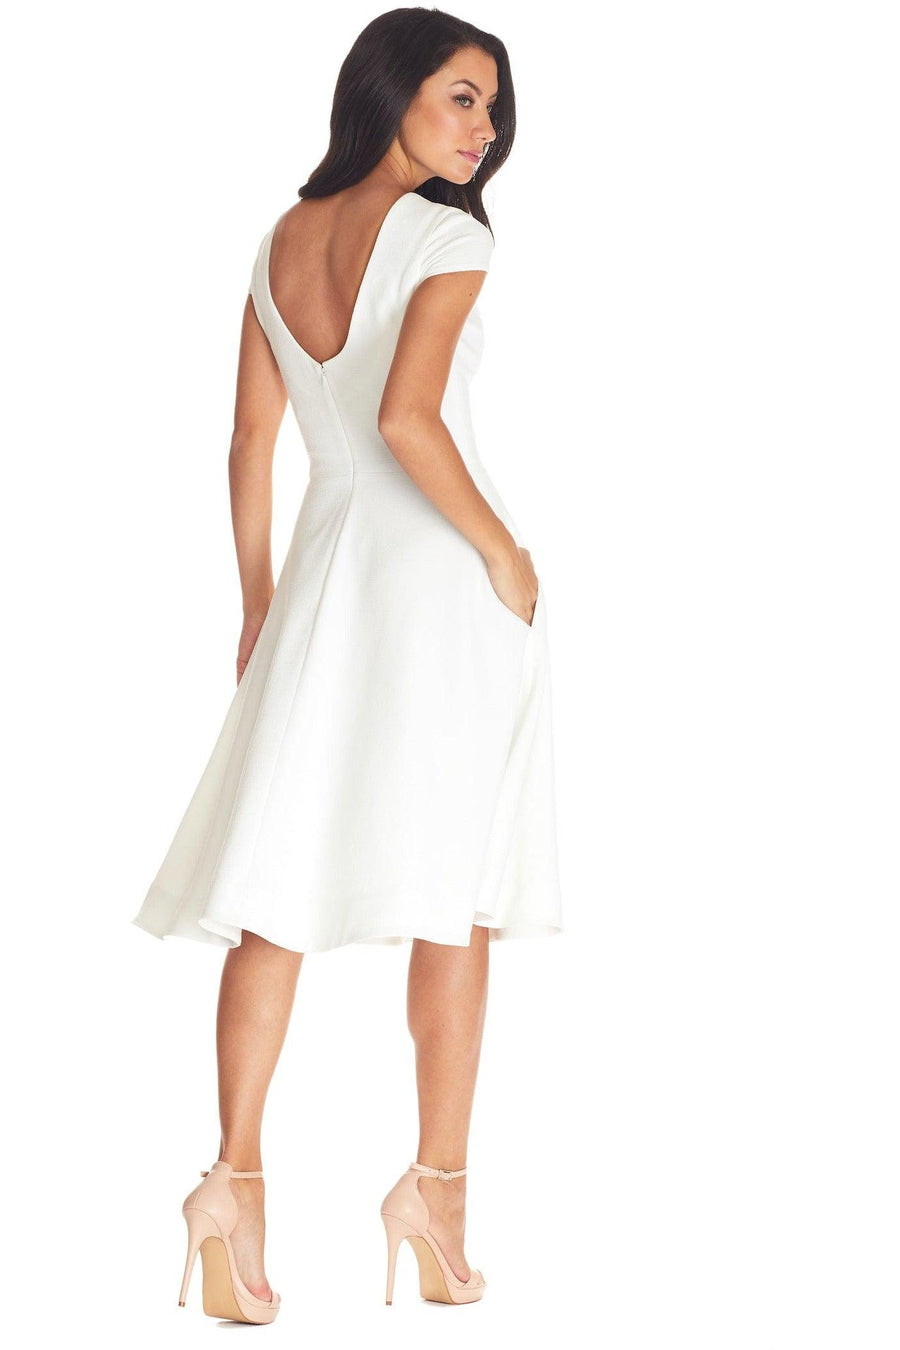 Livia Sophisticated Ivory Fit And Flare Dress - Dress the Population